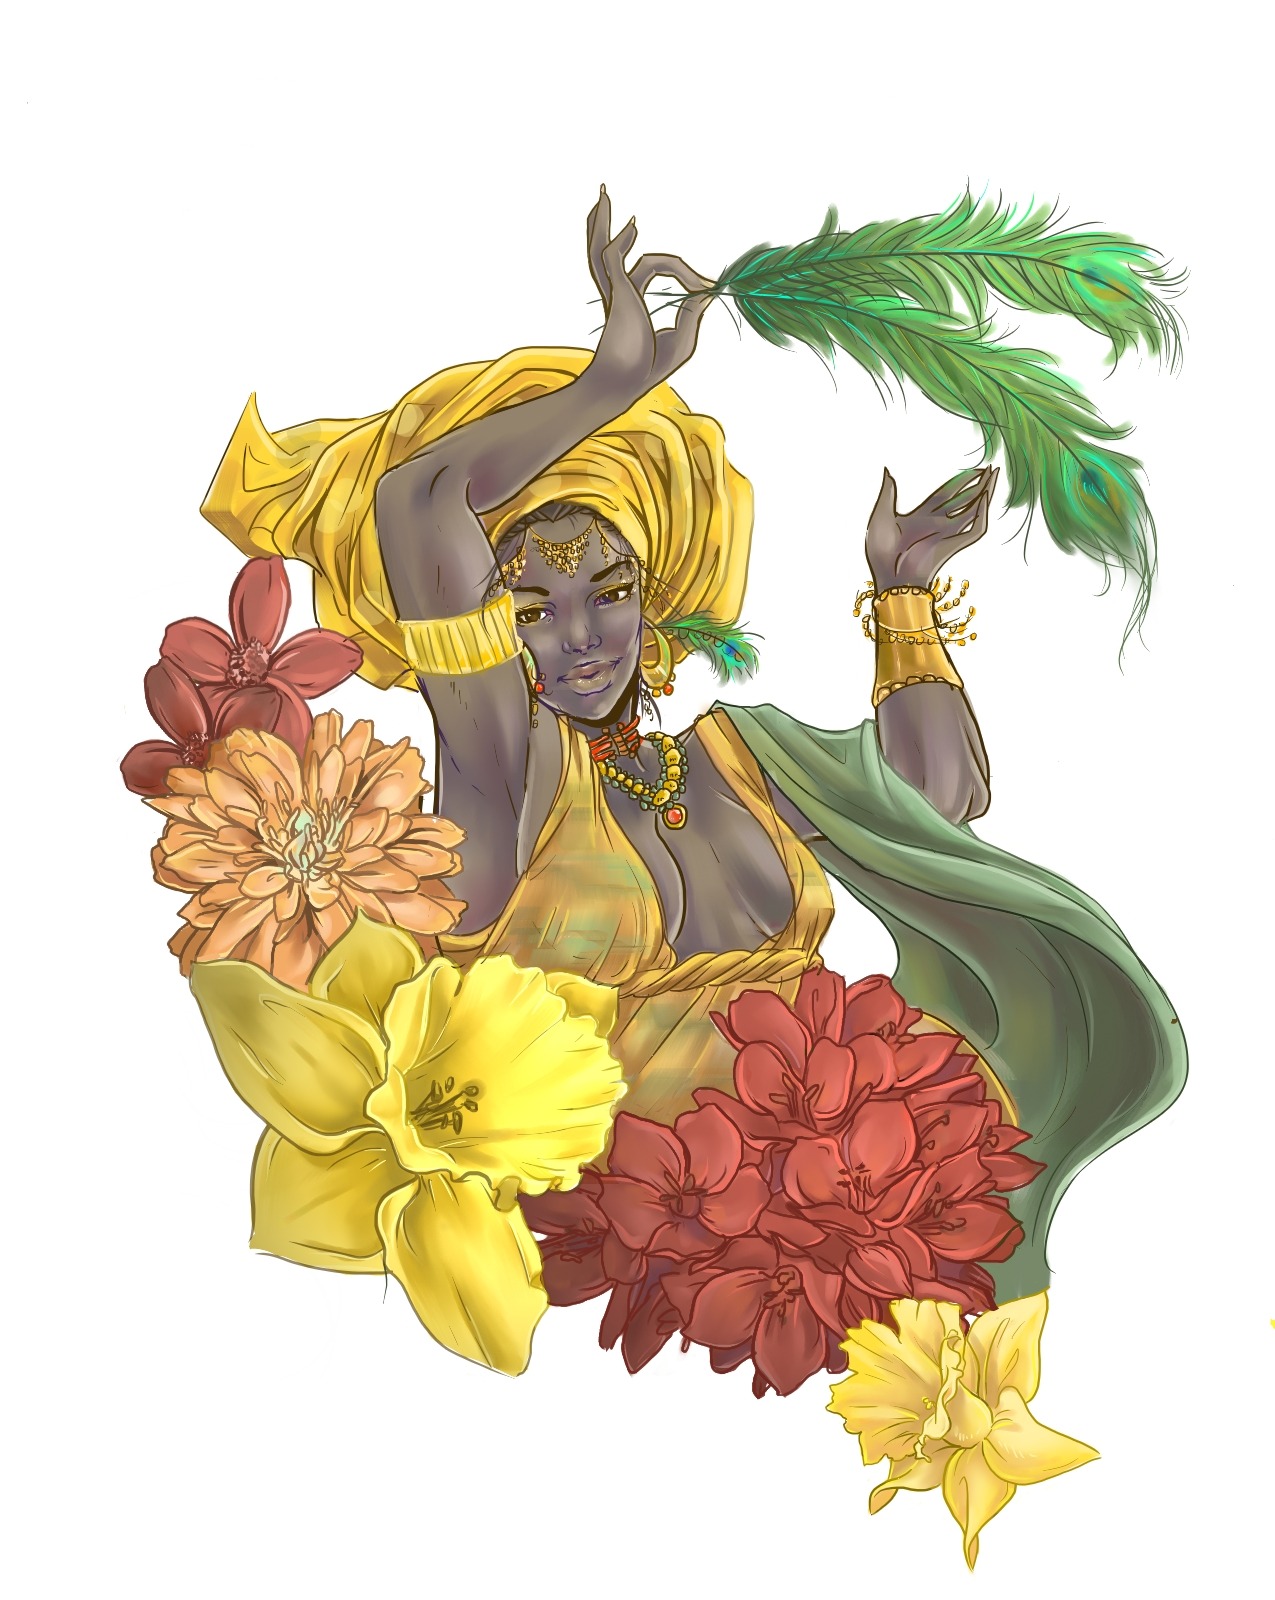 chantelligentdesigns:  Finally finished this beauty. :’) Here is the 3rd Mythological